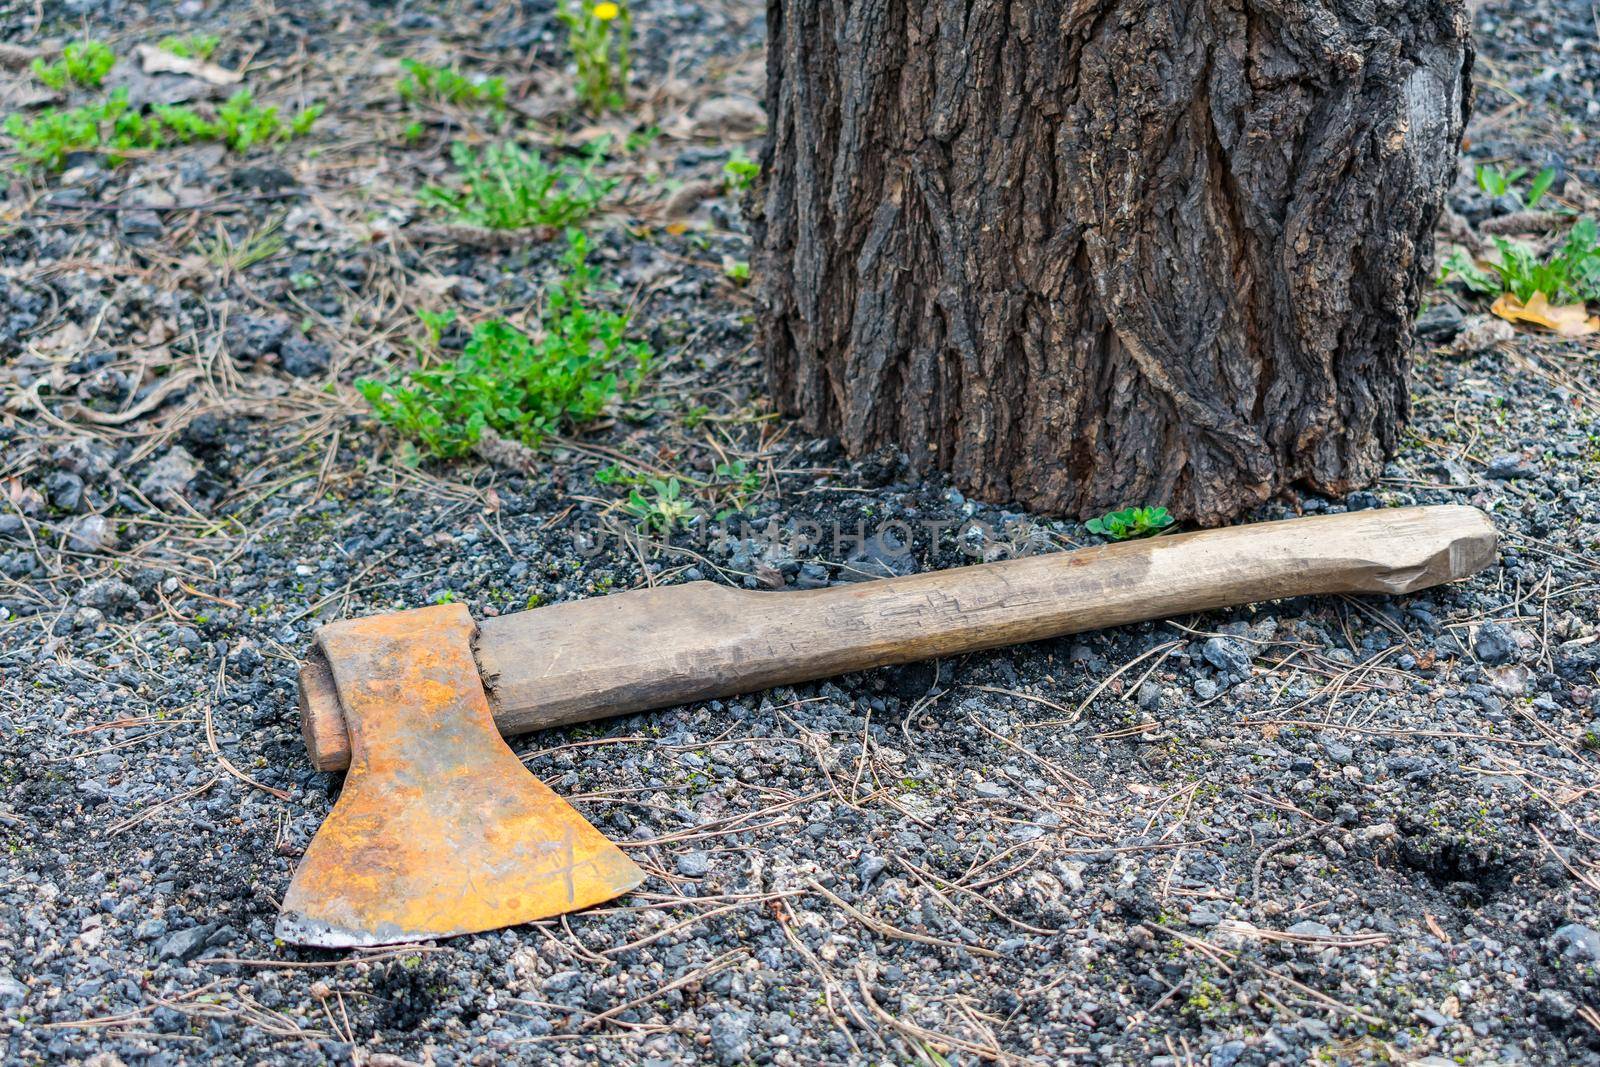 An old and rusty thrown ax is lying on the ground next to a tree